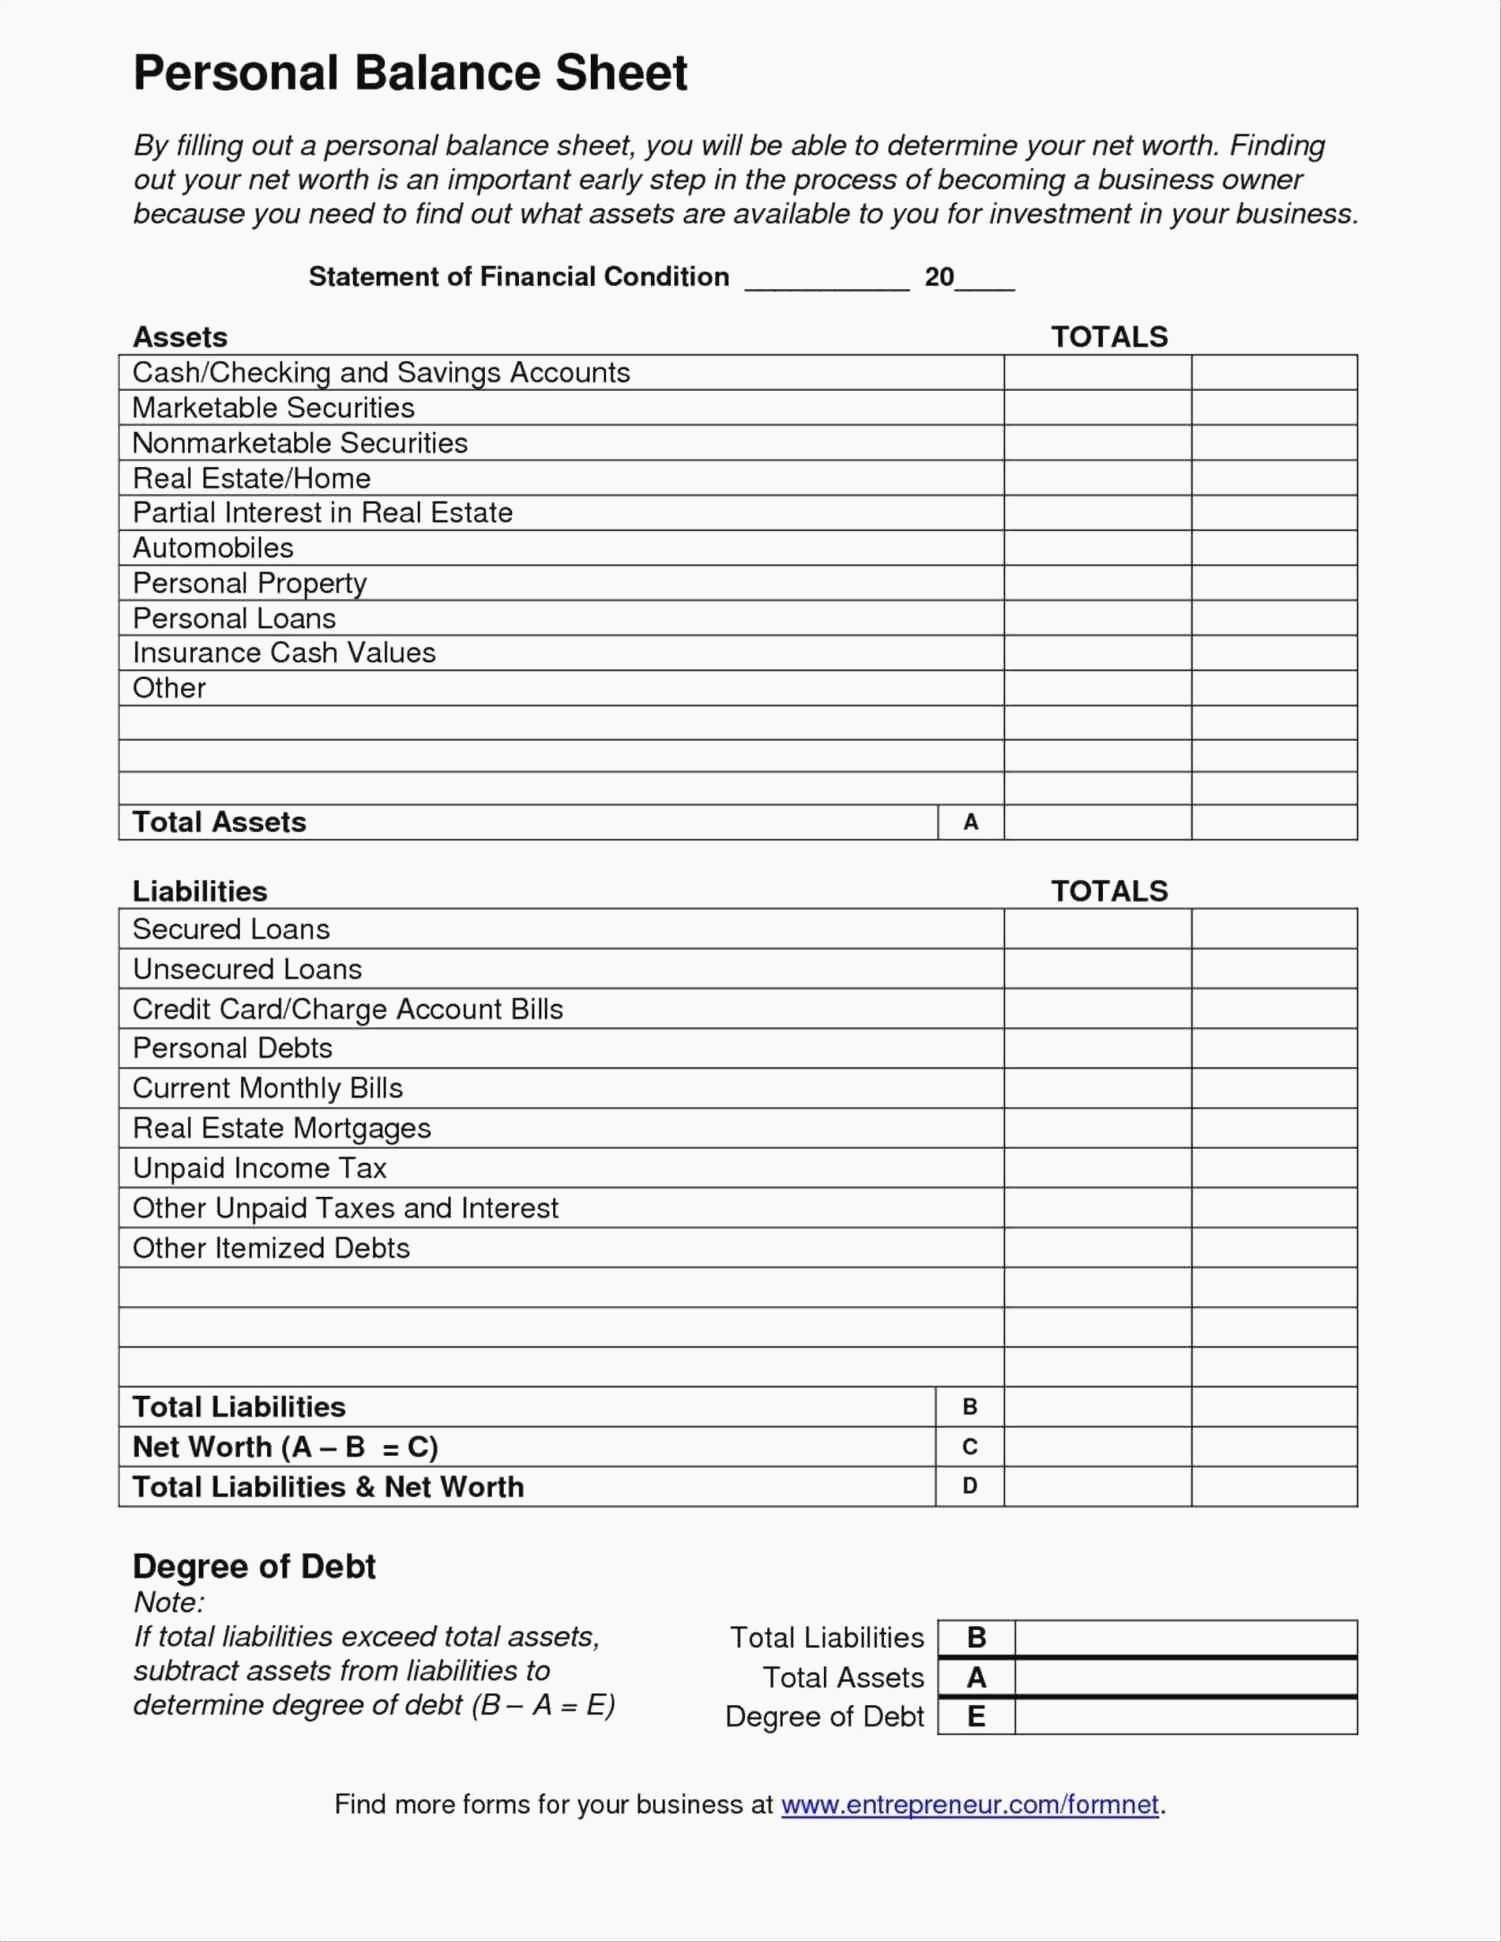 The Law Of Sines Worksheet Also Tax Worksheet 2017 Wp Landingpages